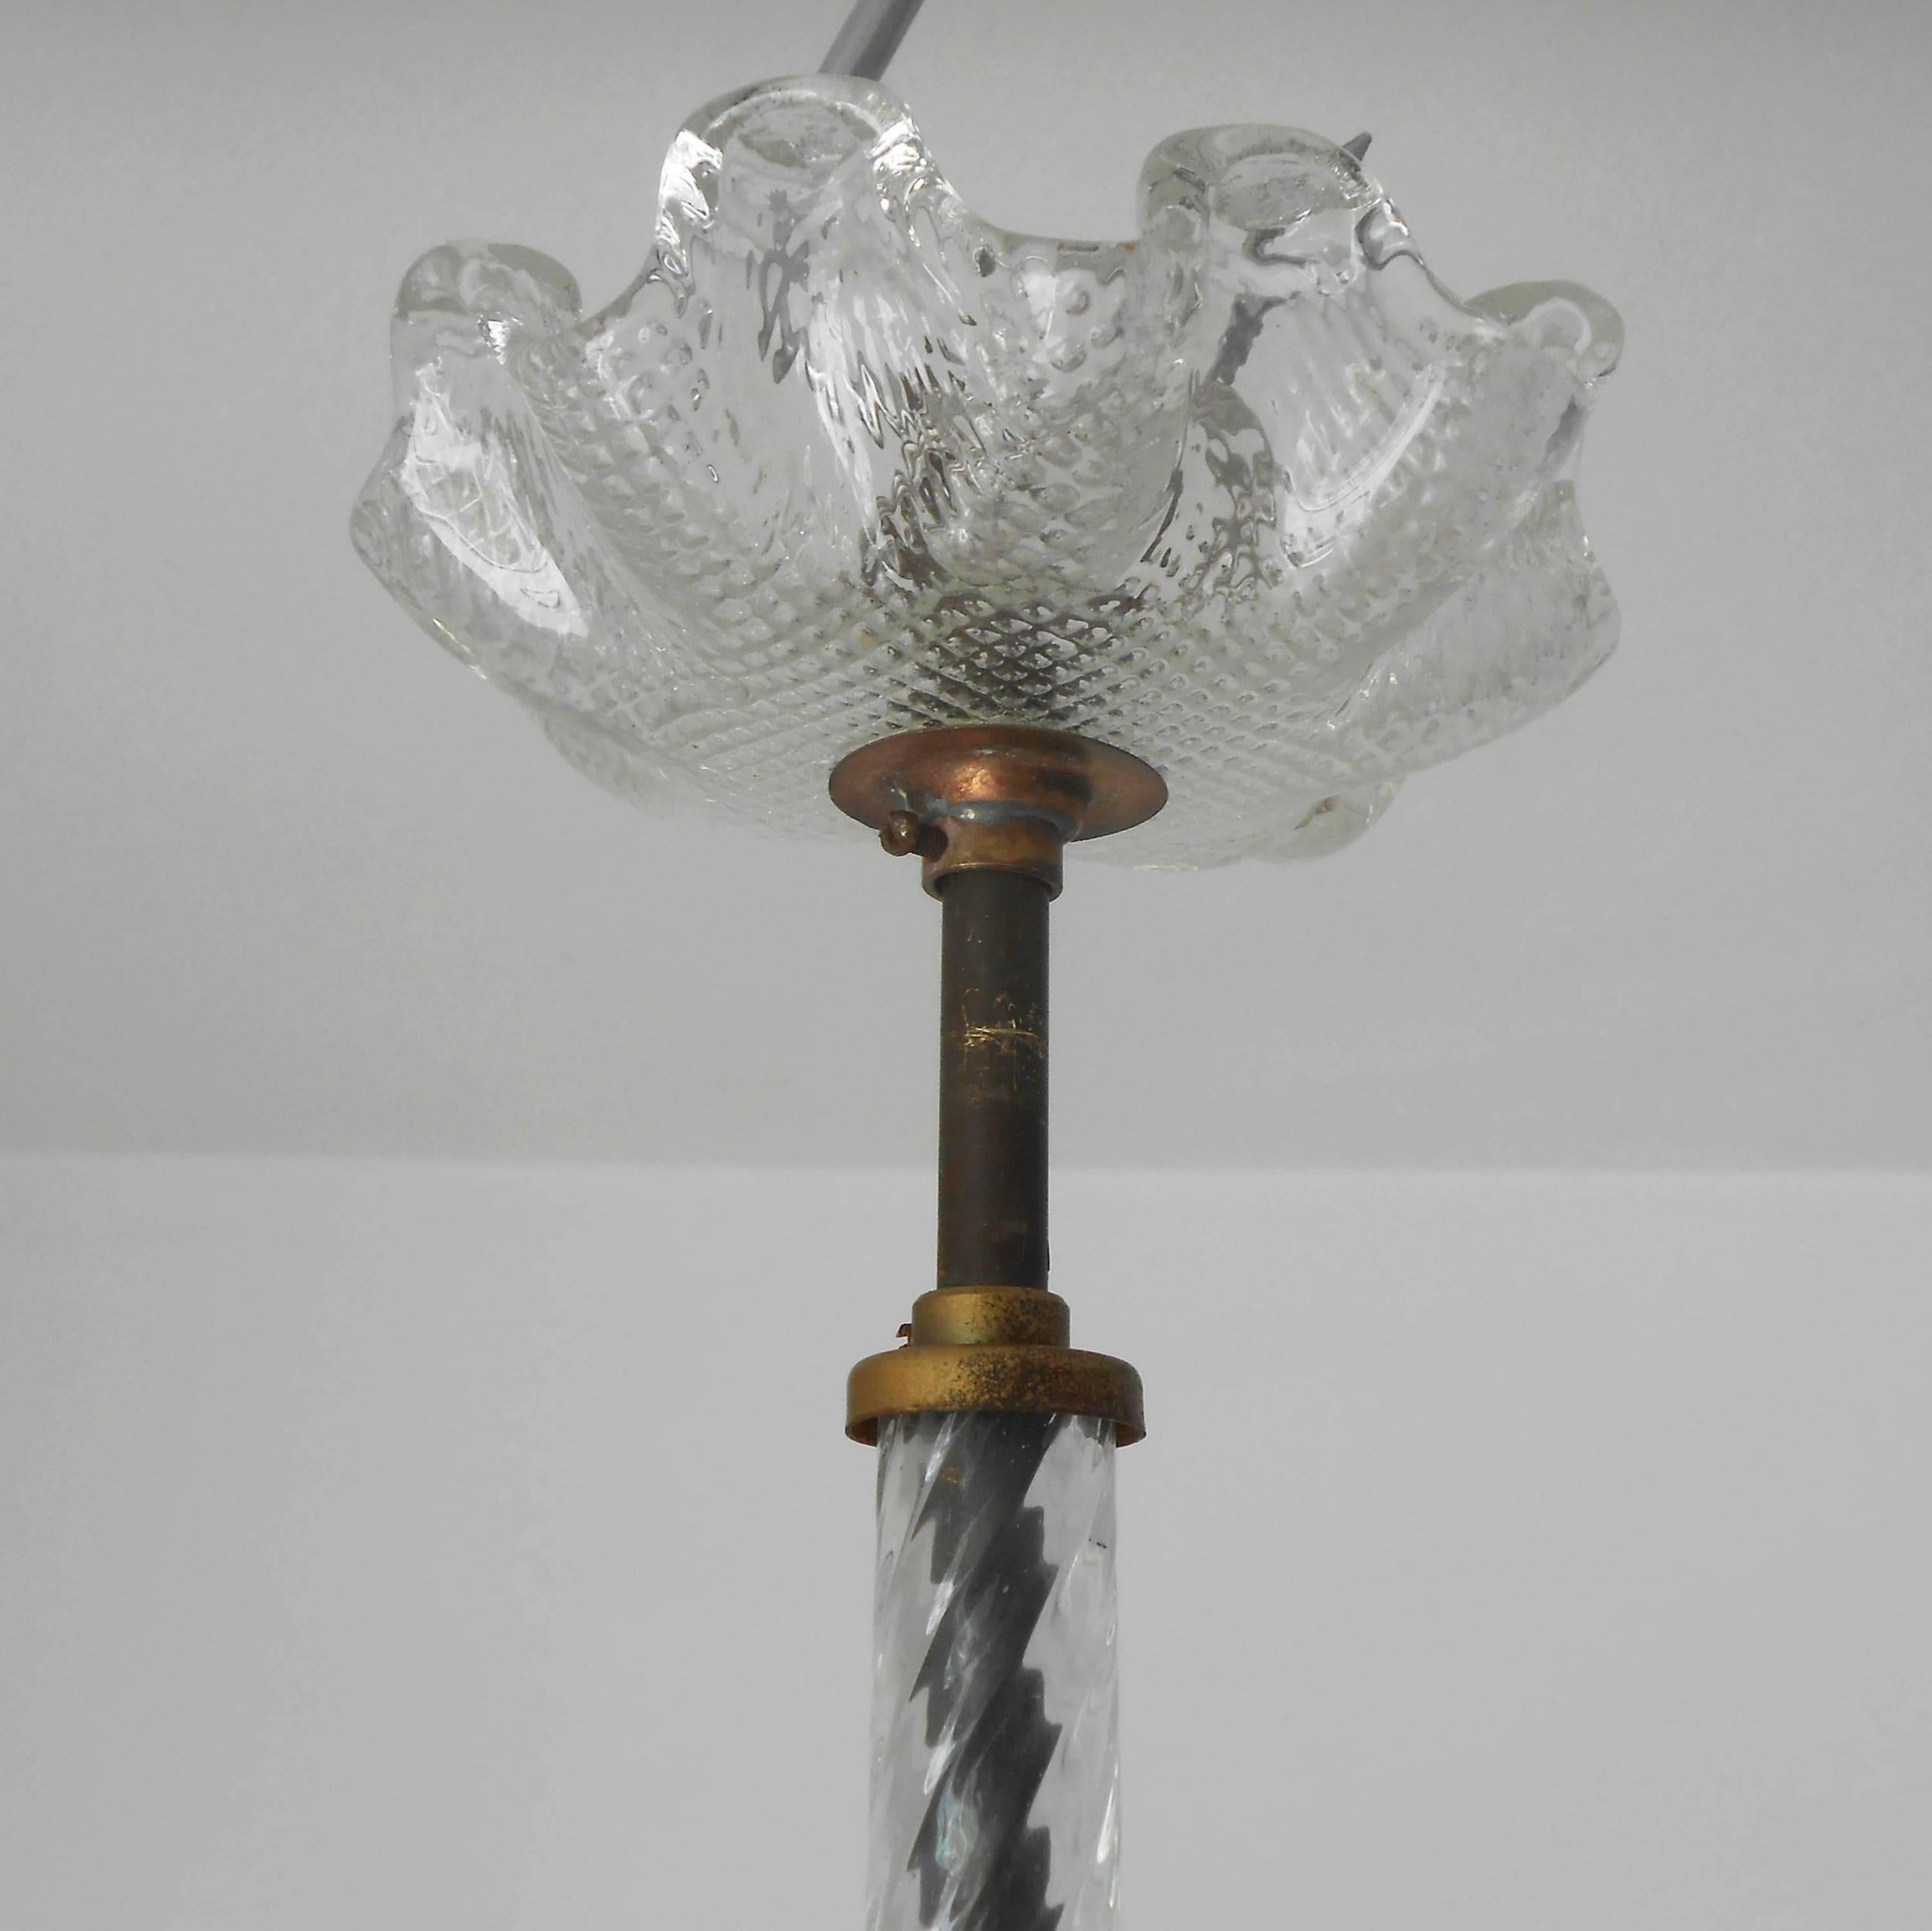 Vintage Italian pendant chandelier with textured clear Murano glass hand blown into a fountain shaped cup surrounded by twisted glass, glass rod and canopy, mounted on brass hardware / Designed by Ercole Barovier circa 1950s / Made in Italy.